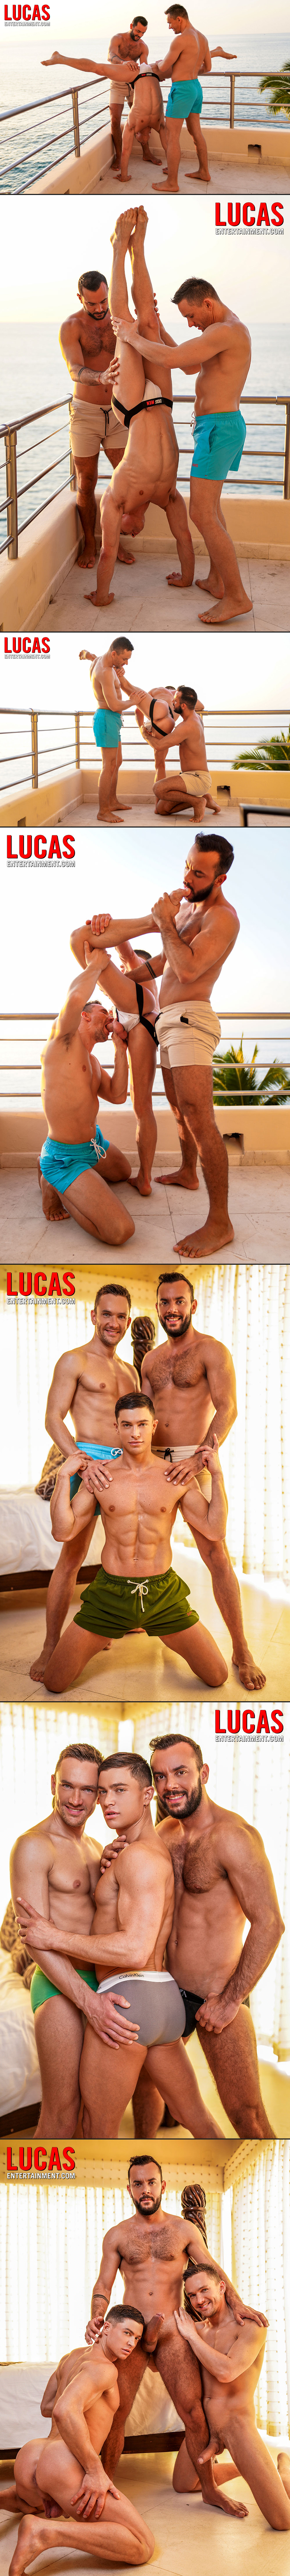 Lucas Men Unleashed, Scene 3 (Sir Peter And Andrey Vic Double Team Ruslan Angelo) at LucasEntertainment